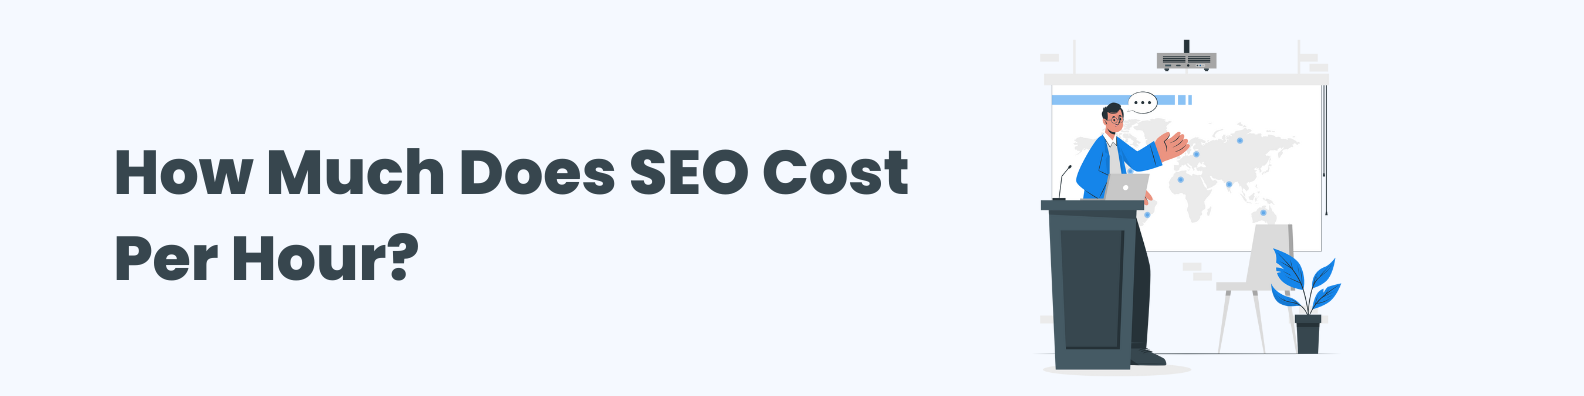 How much does SEO cost per hour?